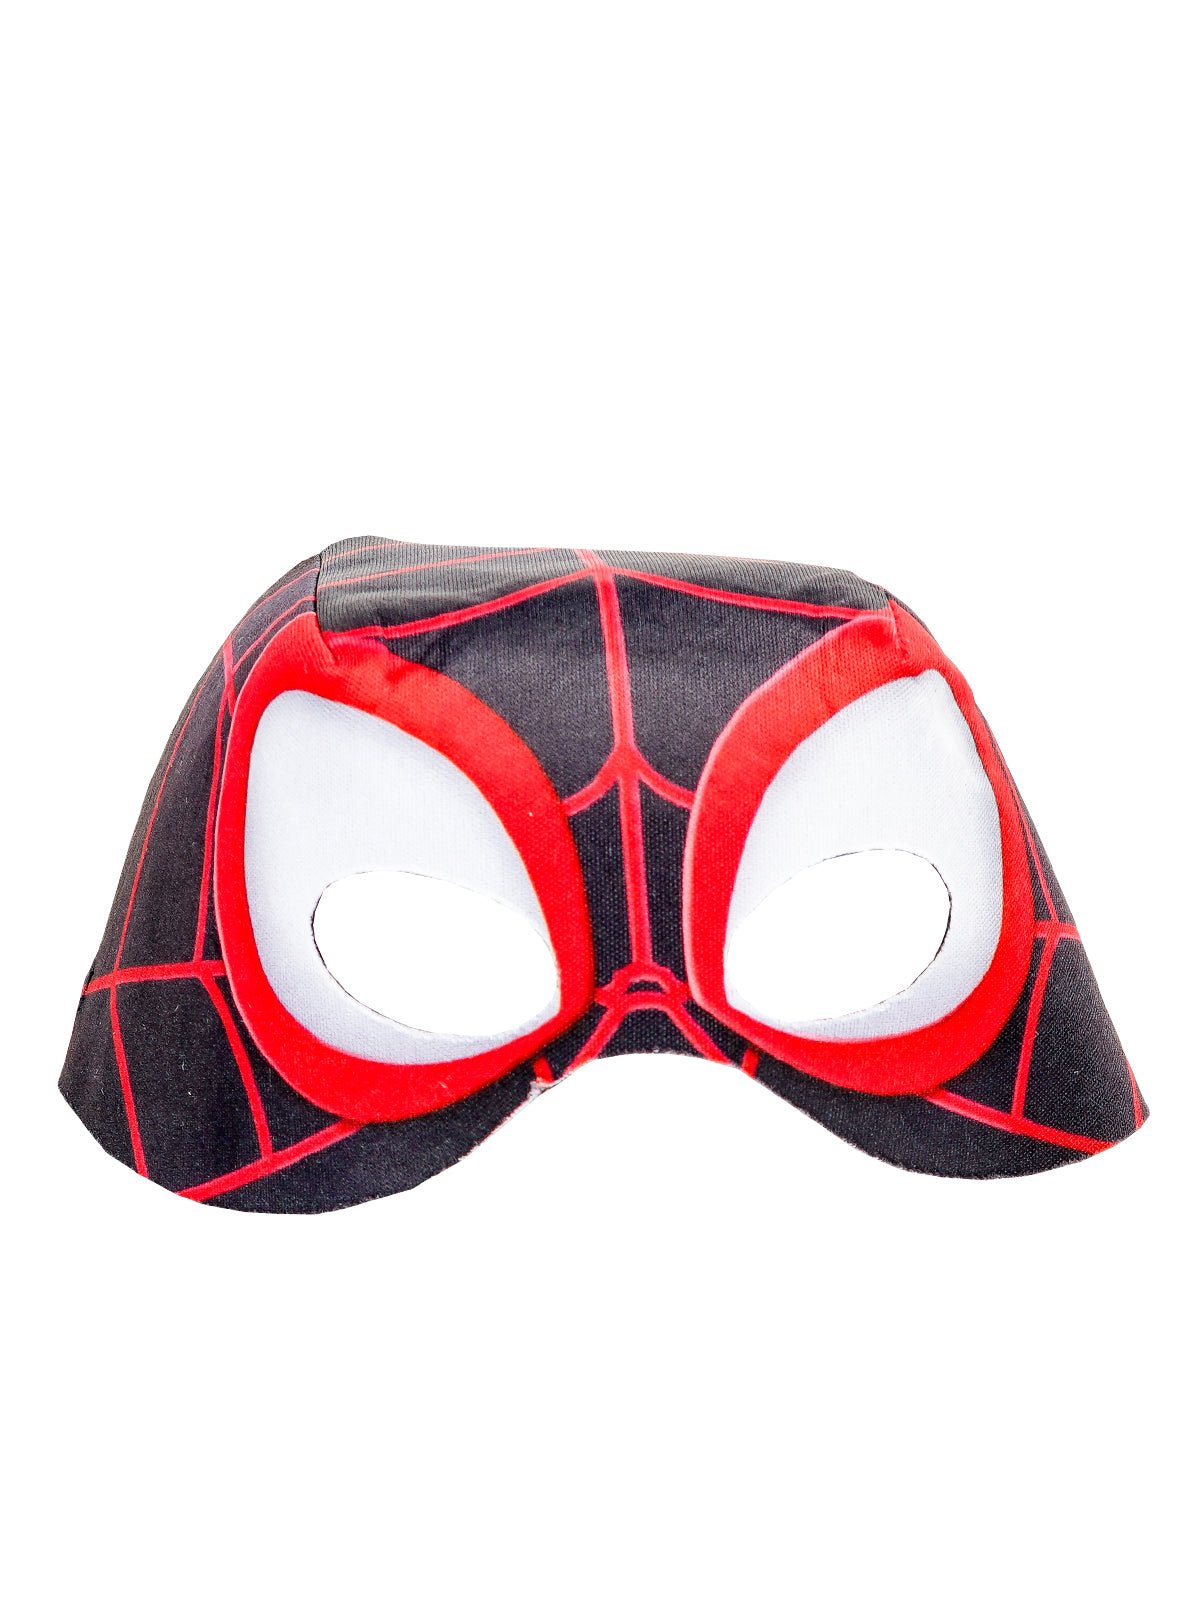 Mask close up view - Kids Miles Morales Spider Accessory Kit